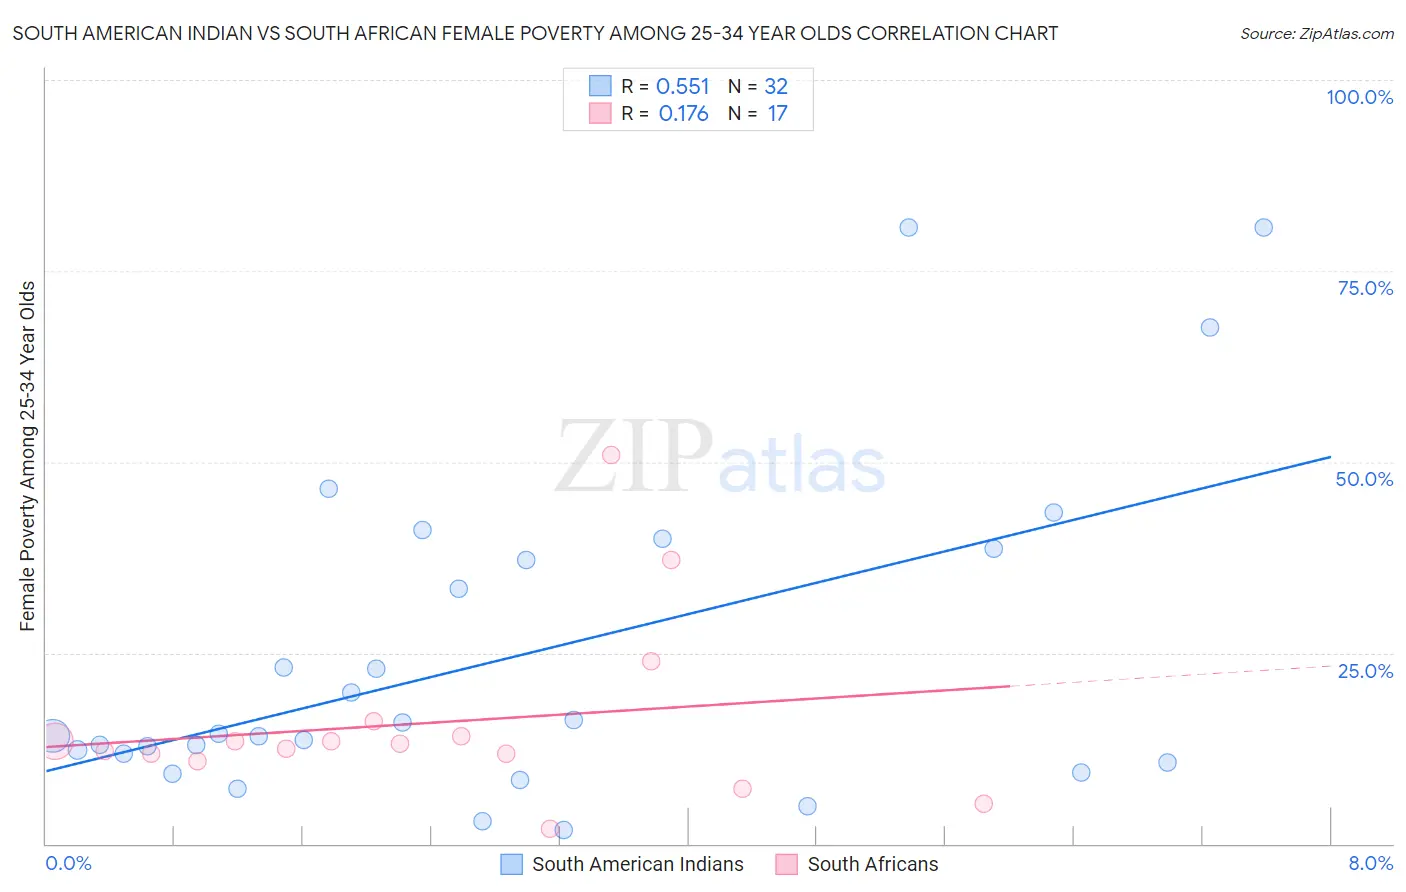 South American Indian vs South African Female Poverty Among 25-34 Year Olds